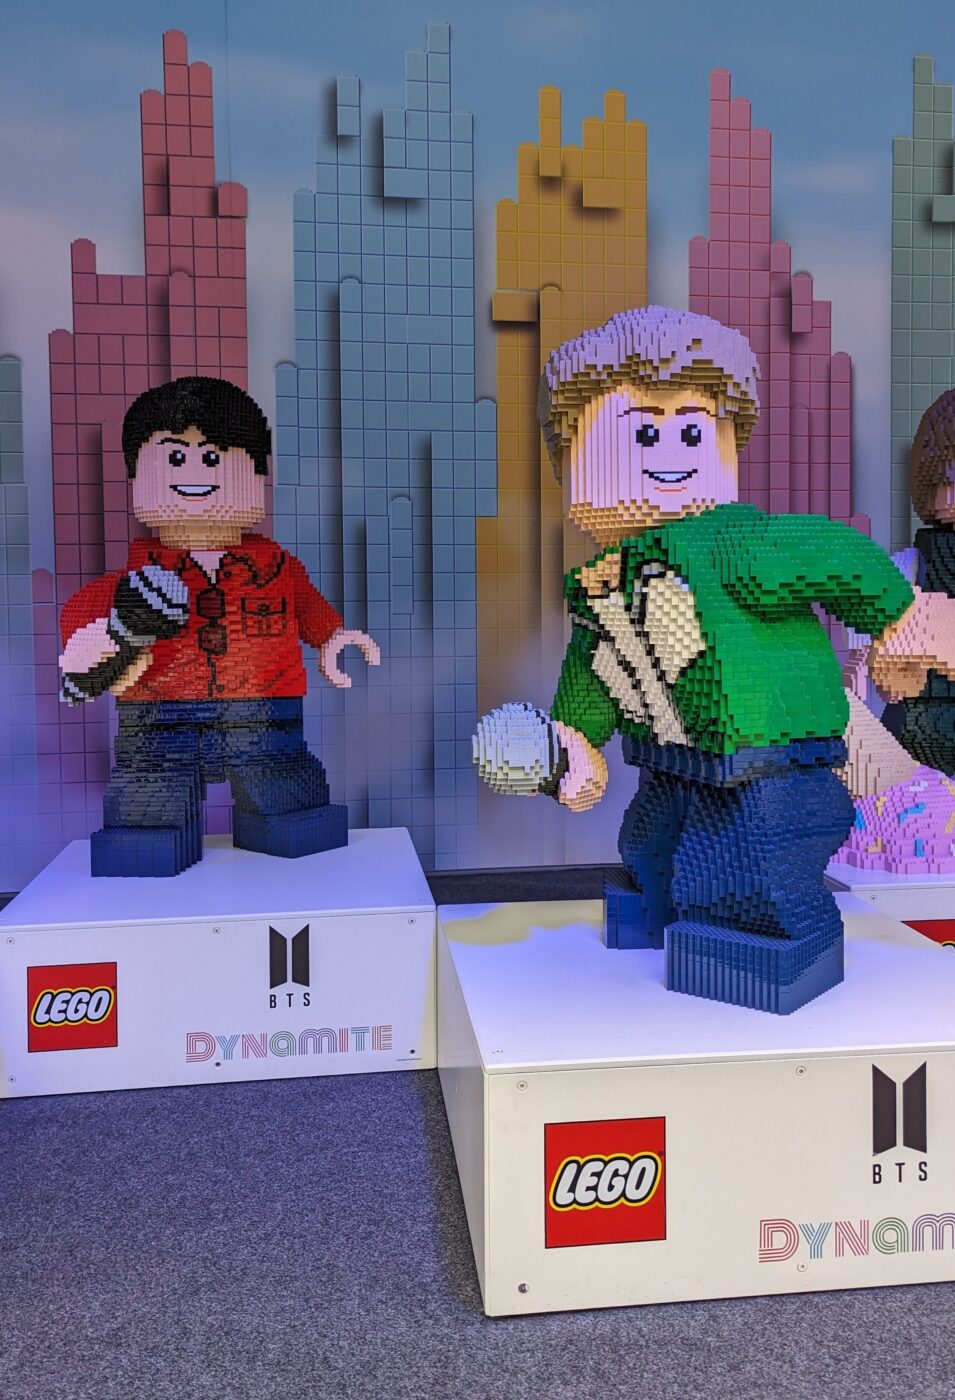 Here’s a look at the LEGO BTS Dynamite Pop-up at Orchard Road, Singapore35